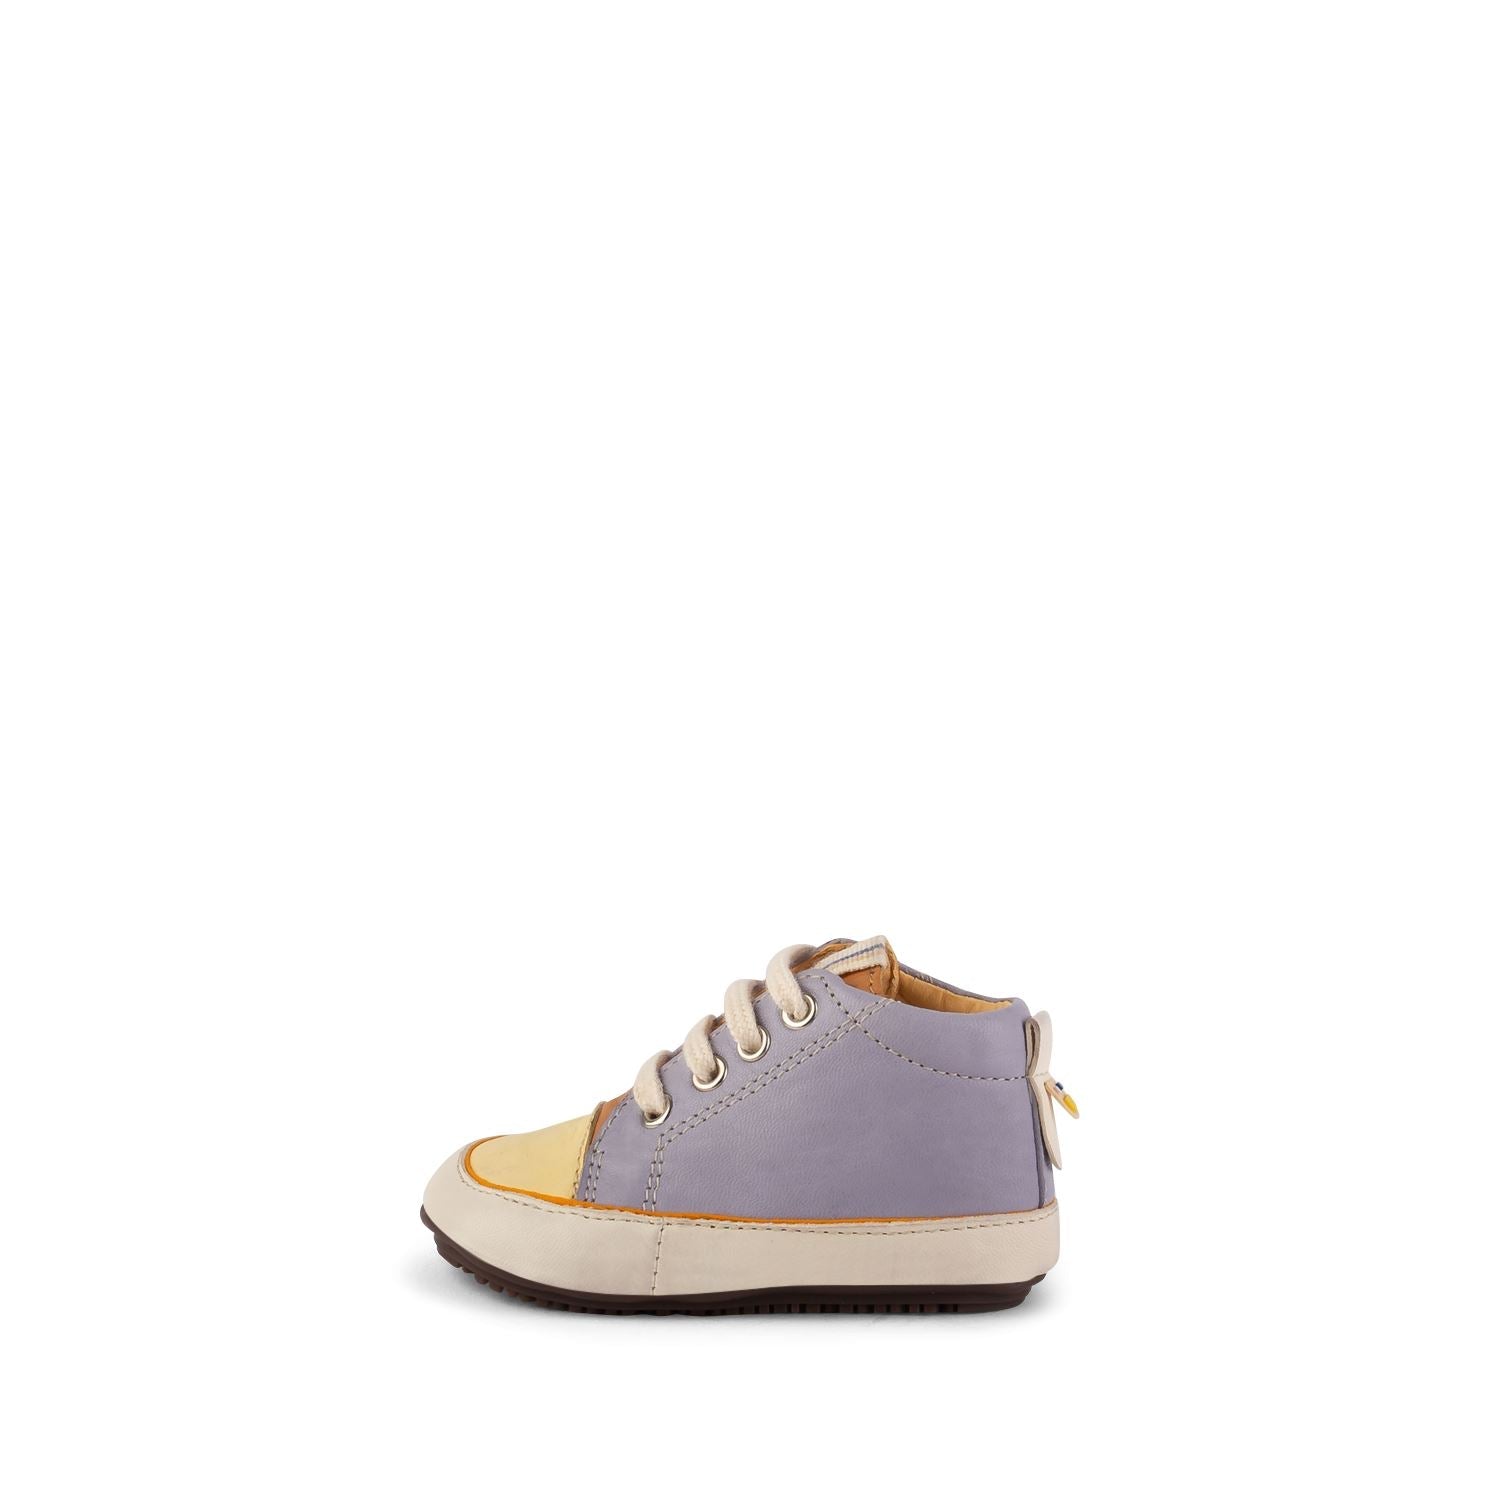 Blue/Camel Sneaker Booties Shoes & Booties Dulis Shoes 